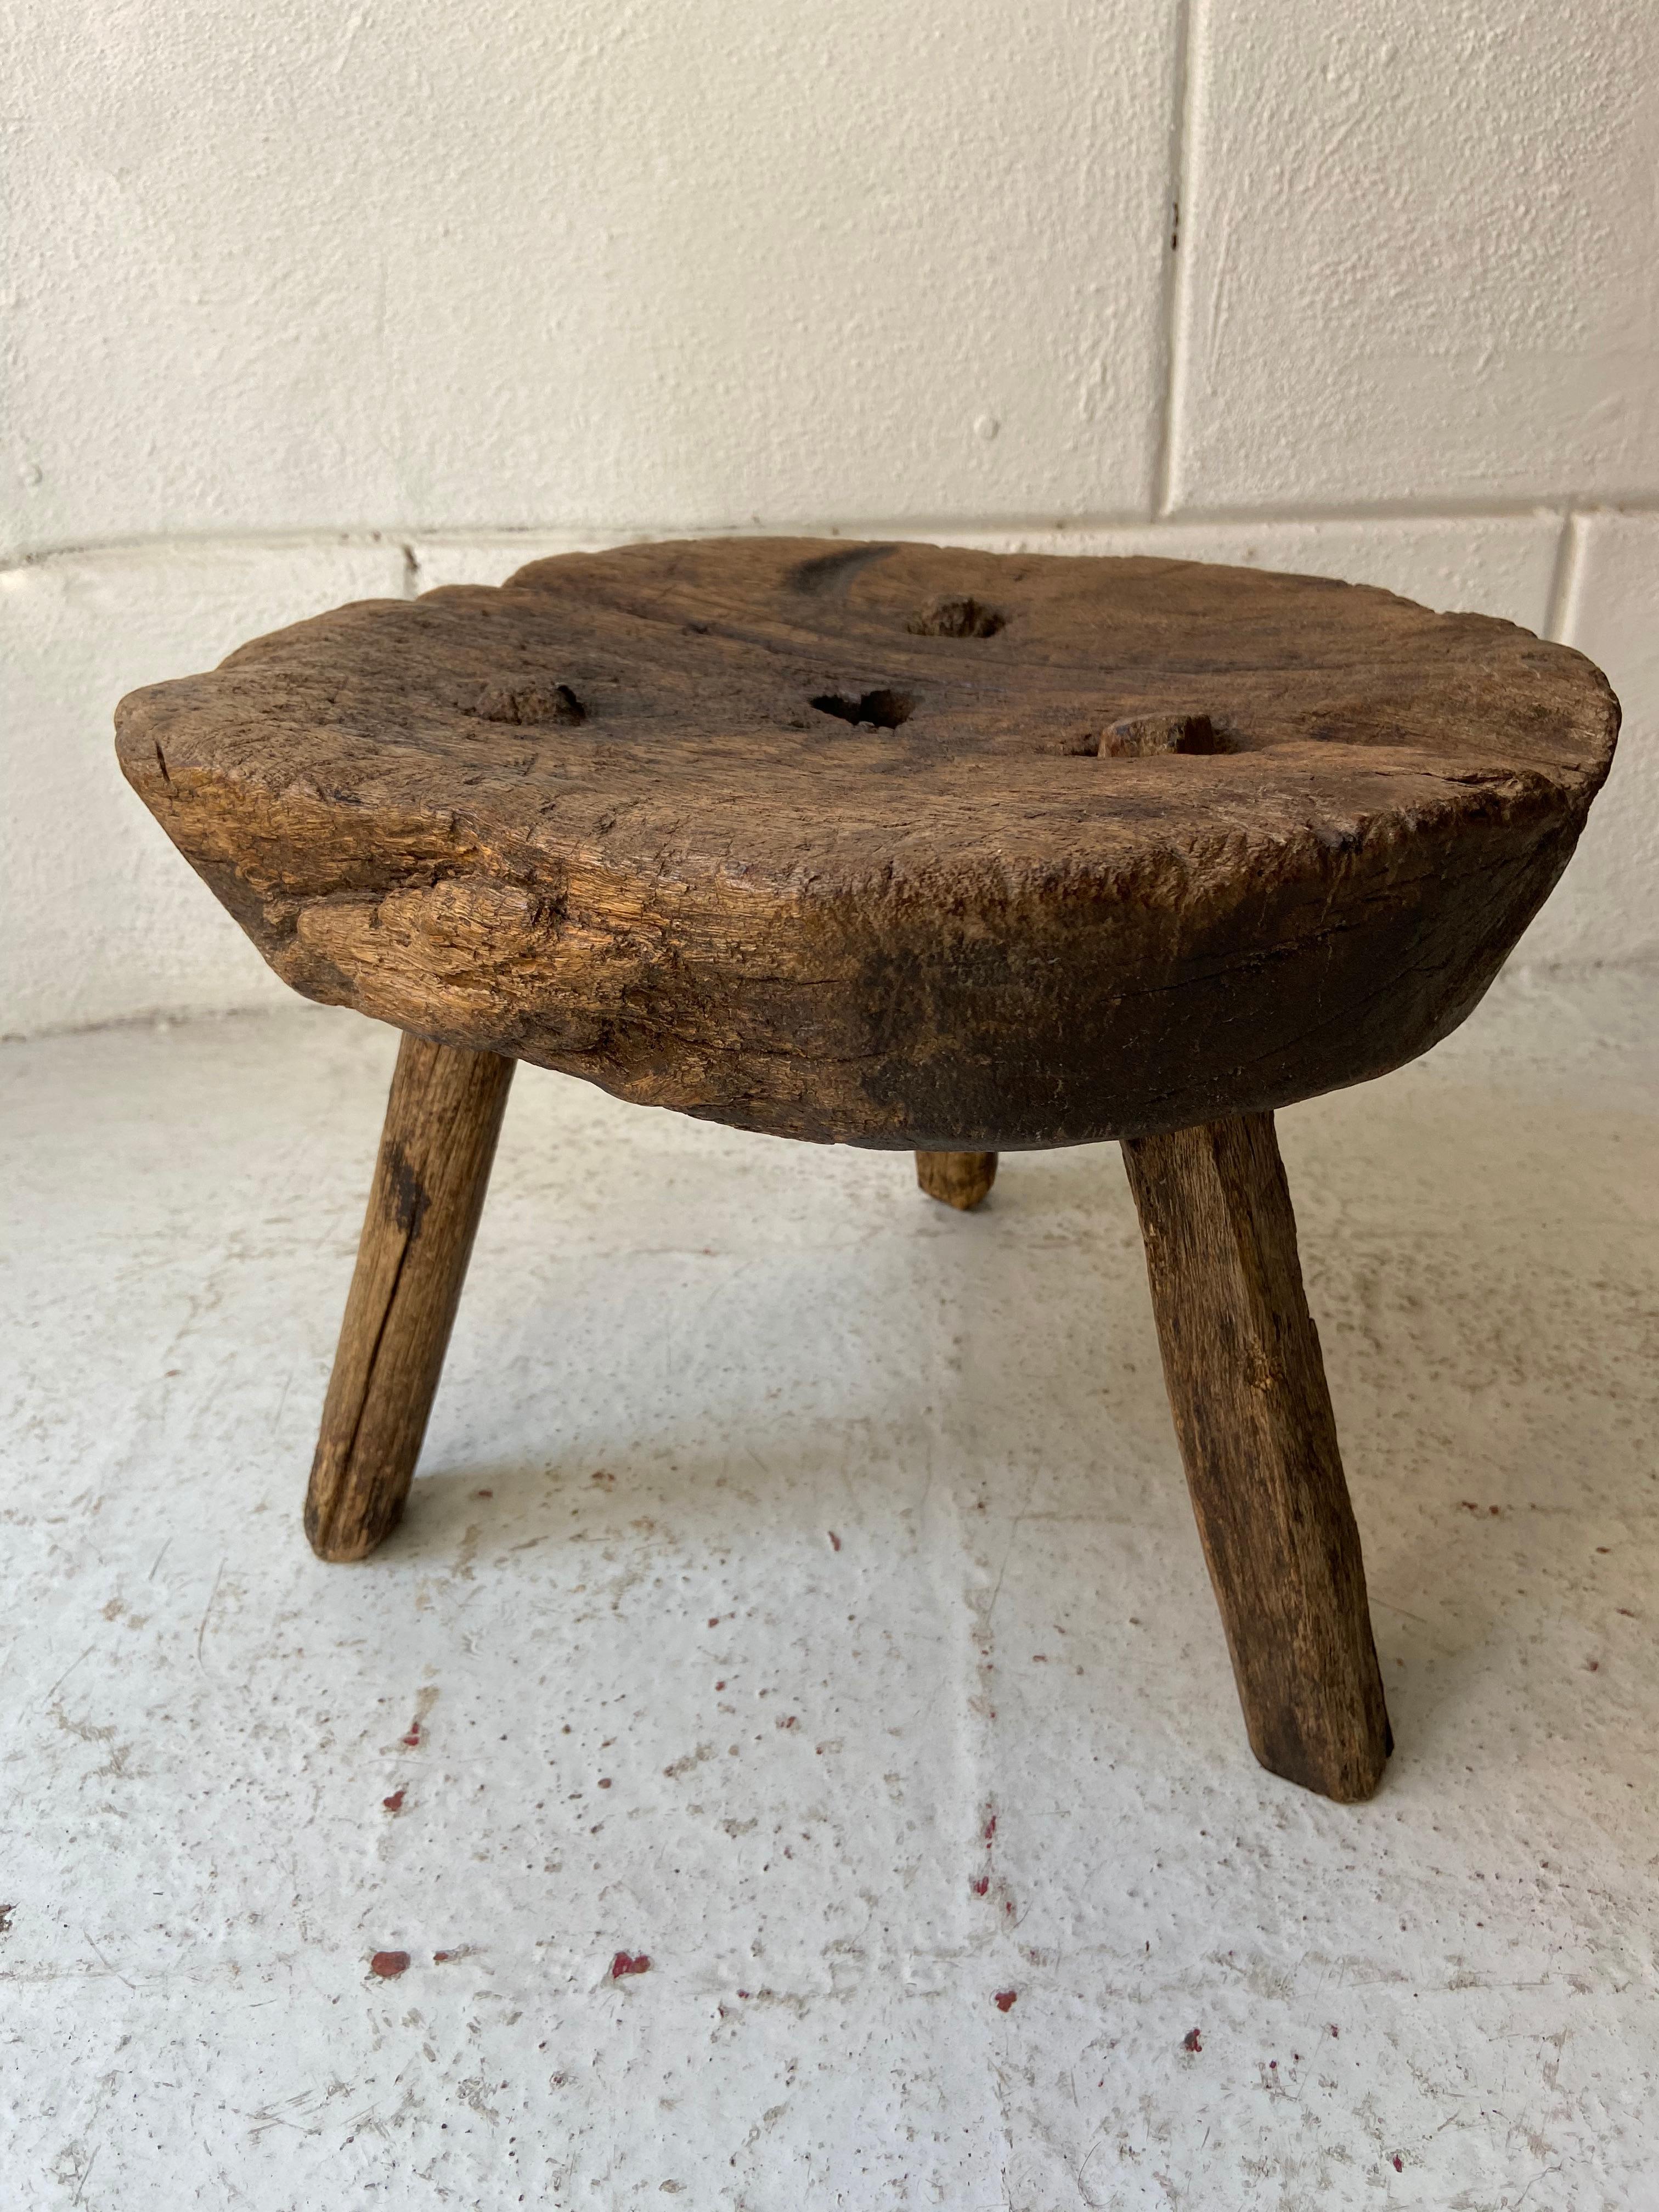 Hand-Carved Antique Hardwood Stool from Guanajuato, Mexico